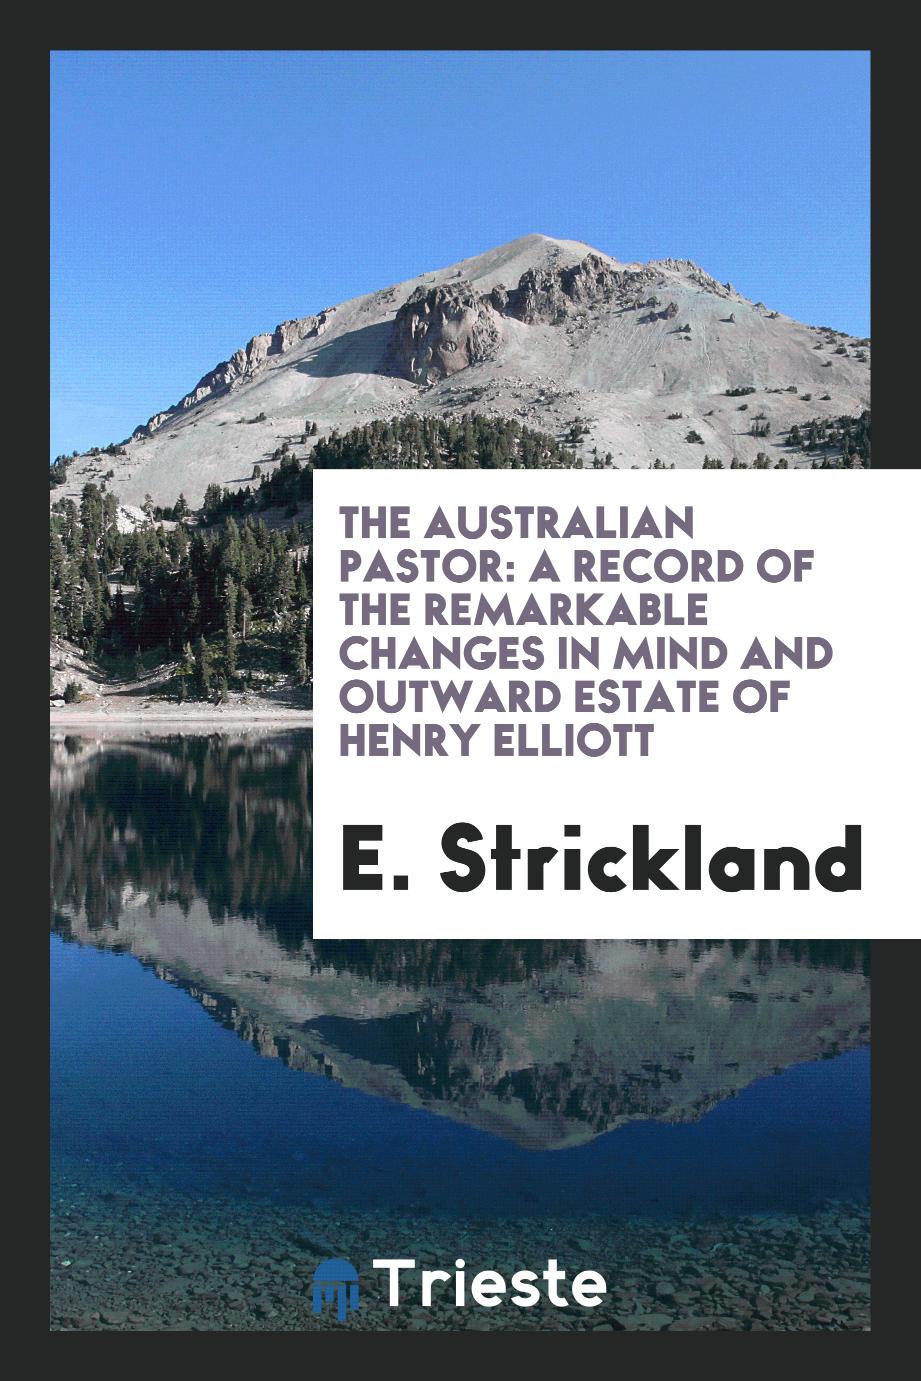 The Australian Pastor: A Record of the Remarkable Changes in Mind and Outward Estate of Henry Elliott